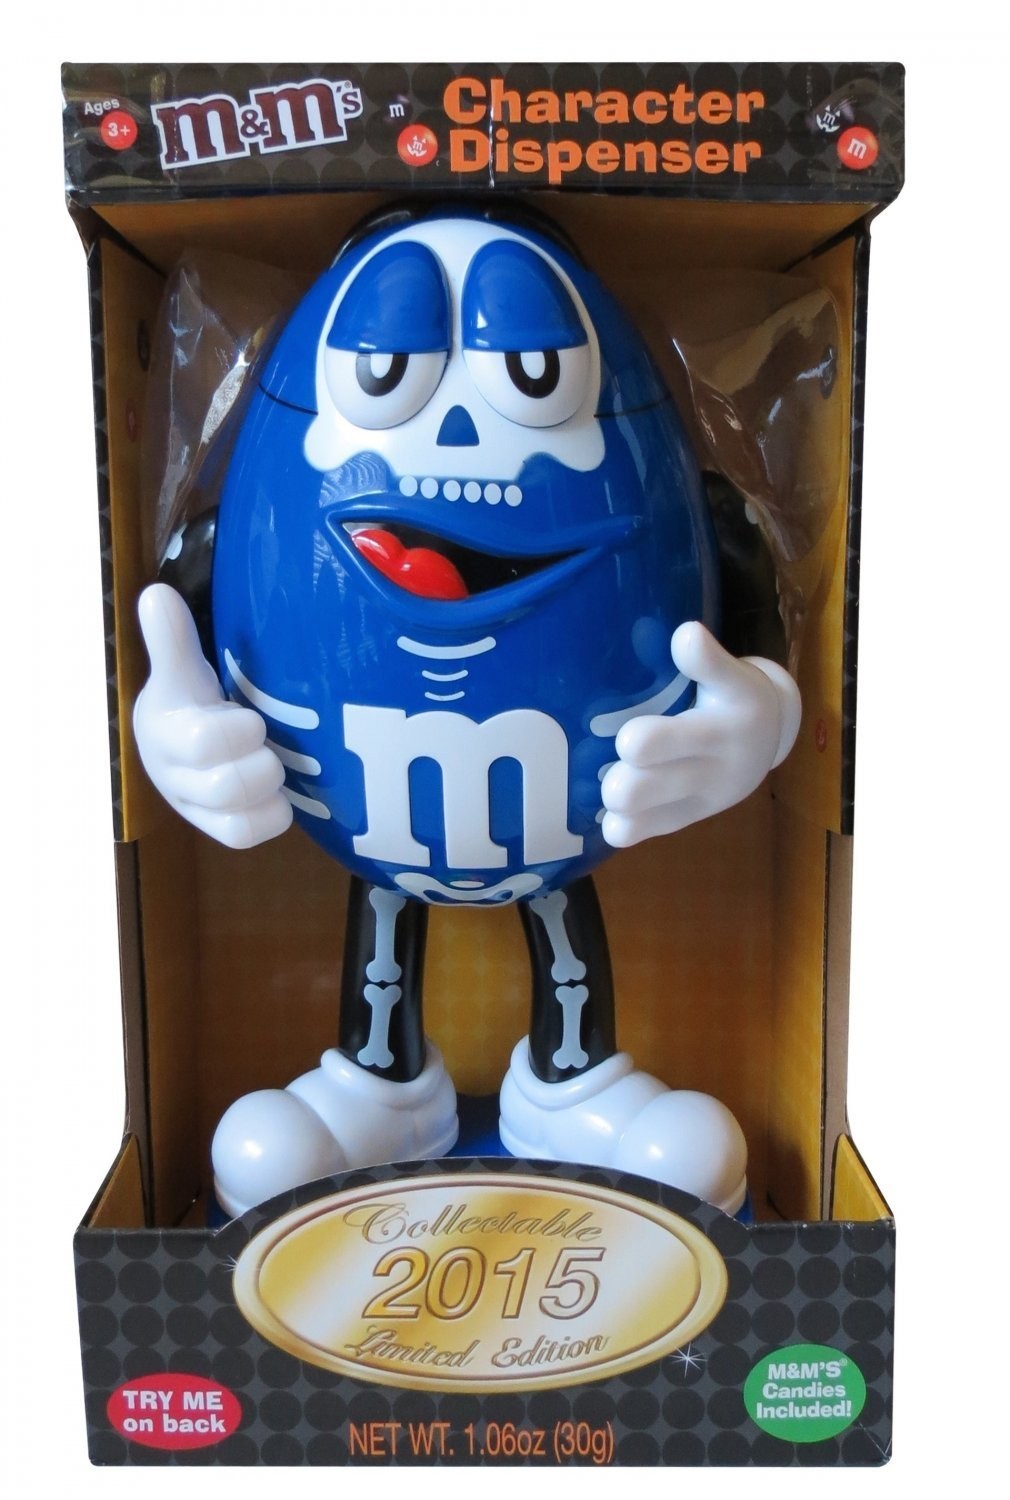 https://www.candyrific.com/res/uploads/brands/products/full/M-M-Halloween-Collectible-Character-Dispenser.jpg